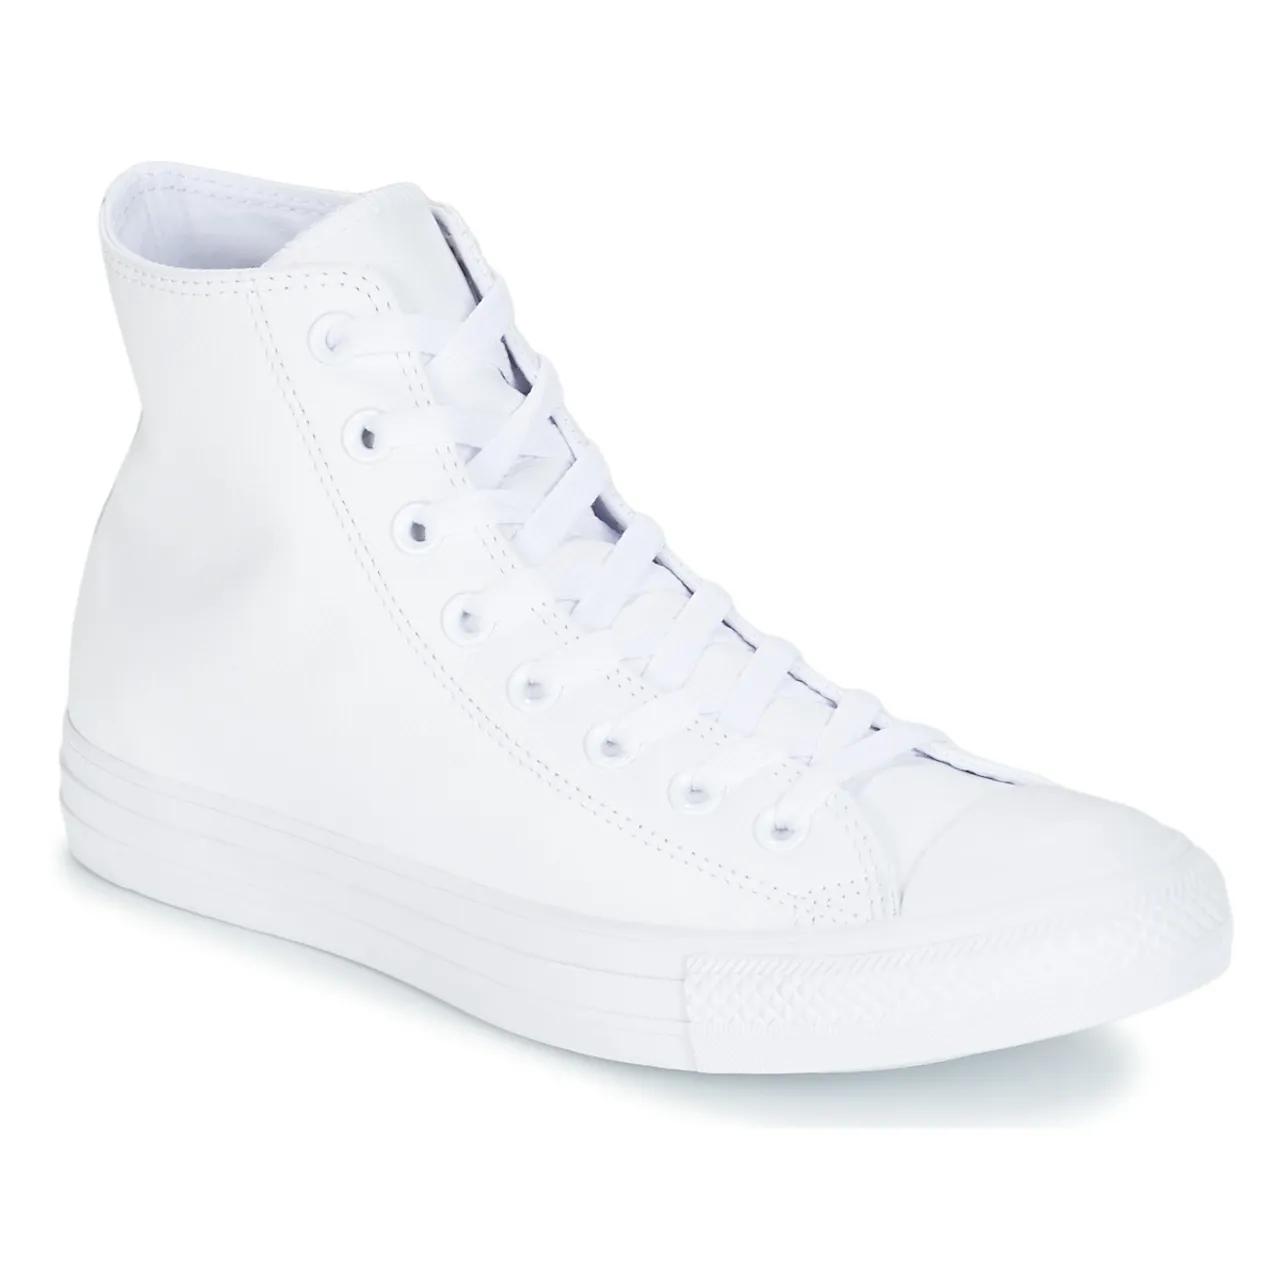 Converse  ALL STAR MONOCHROME CUIR HI  women's Shoes (High-top Trainers) in White